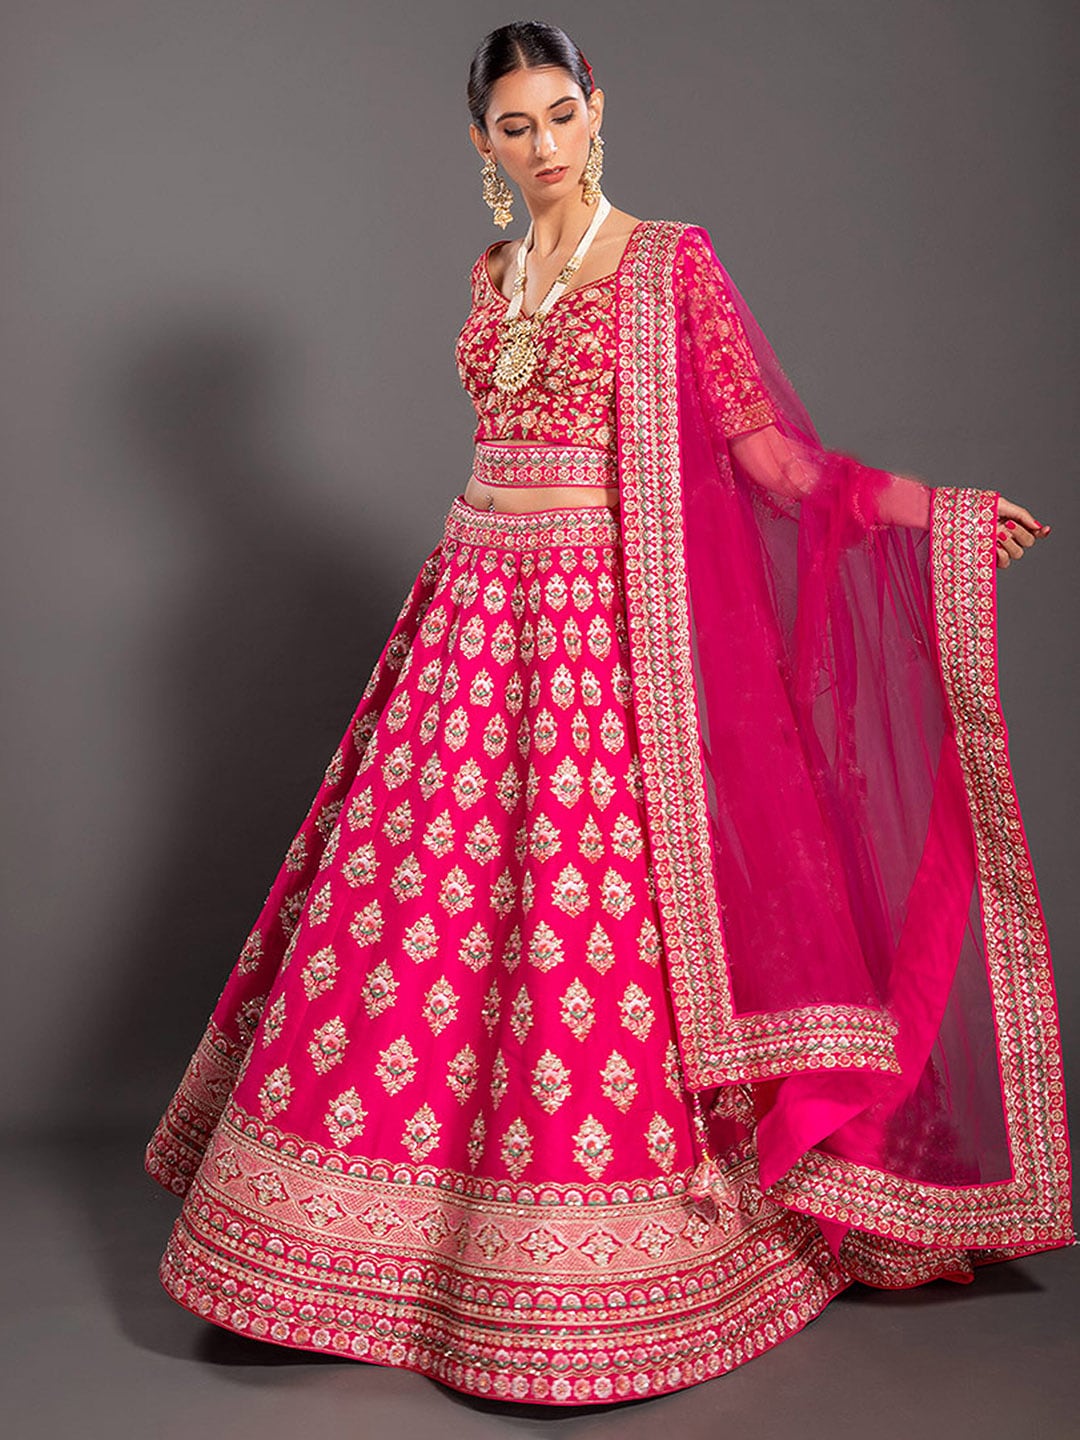 Xenilla Floral Embroidered Semi-Stitched Lehenga & Unstitched Blouse With Dupatta Price in India